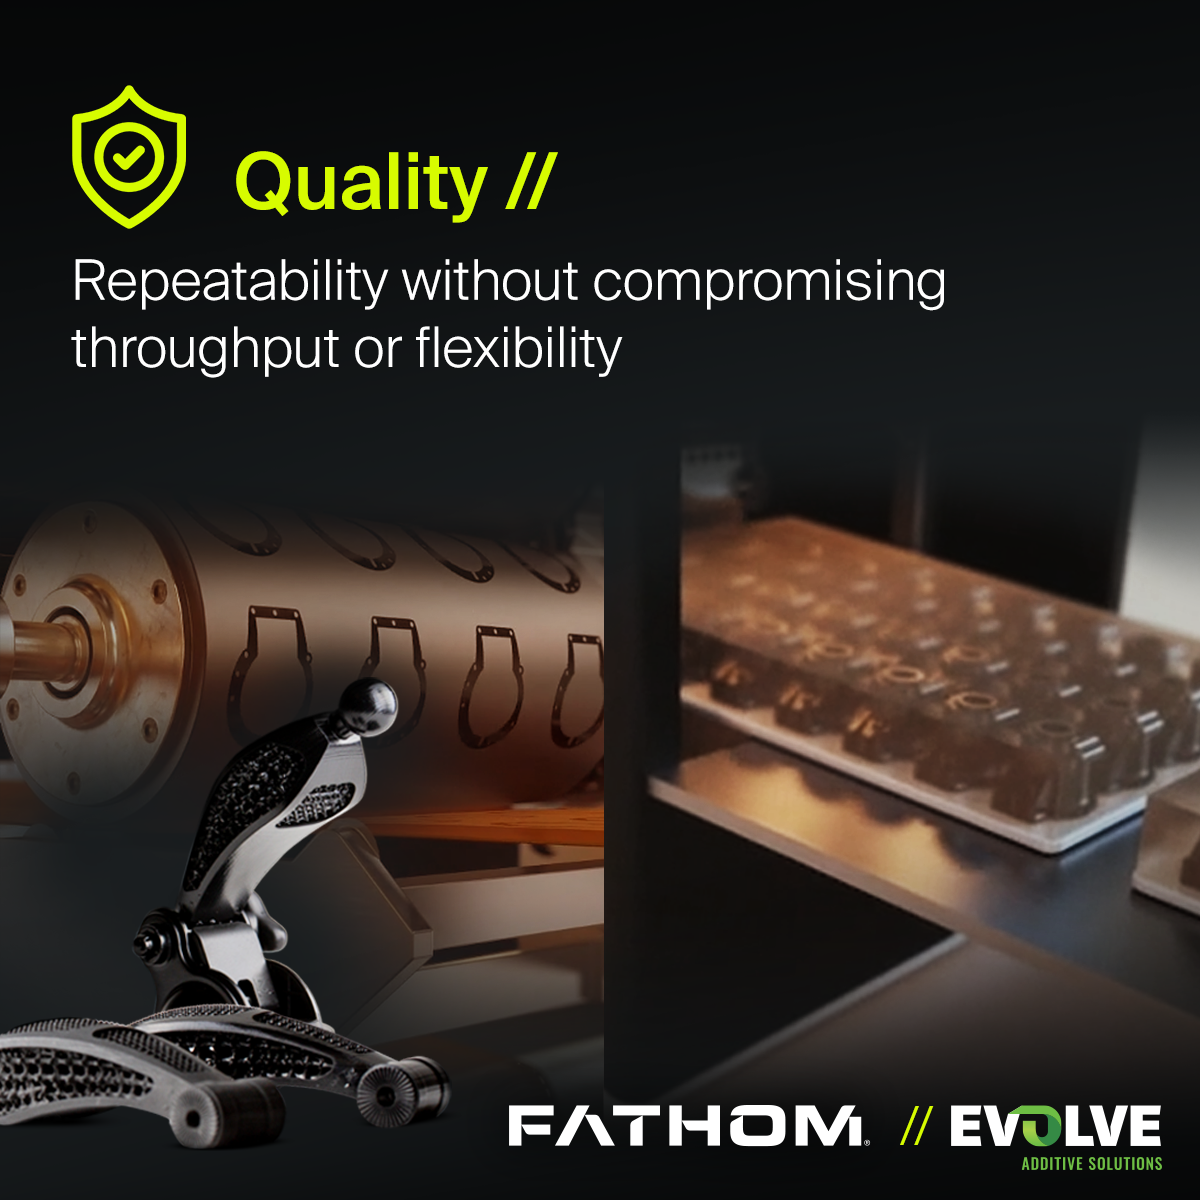 Partnership between Fathom and Evolve Additive Solutions